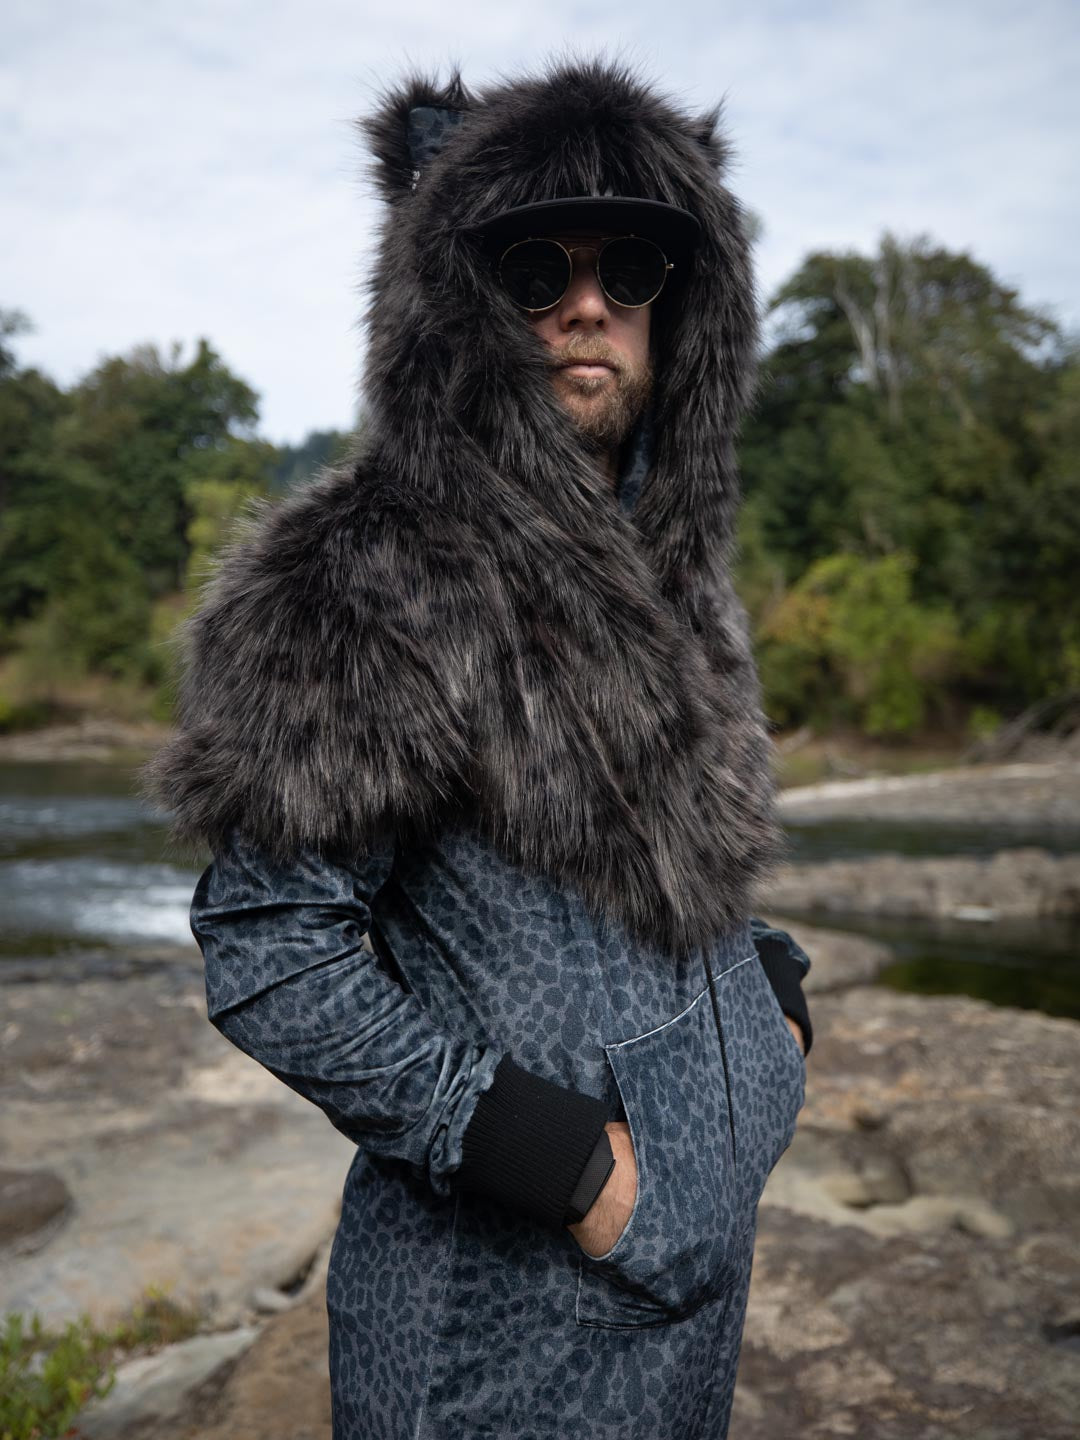 Black Panther Velvet Classic Faux Fur Animal Onesie is Featured on a Male Model Wearing Sunglasses